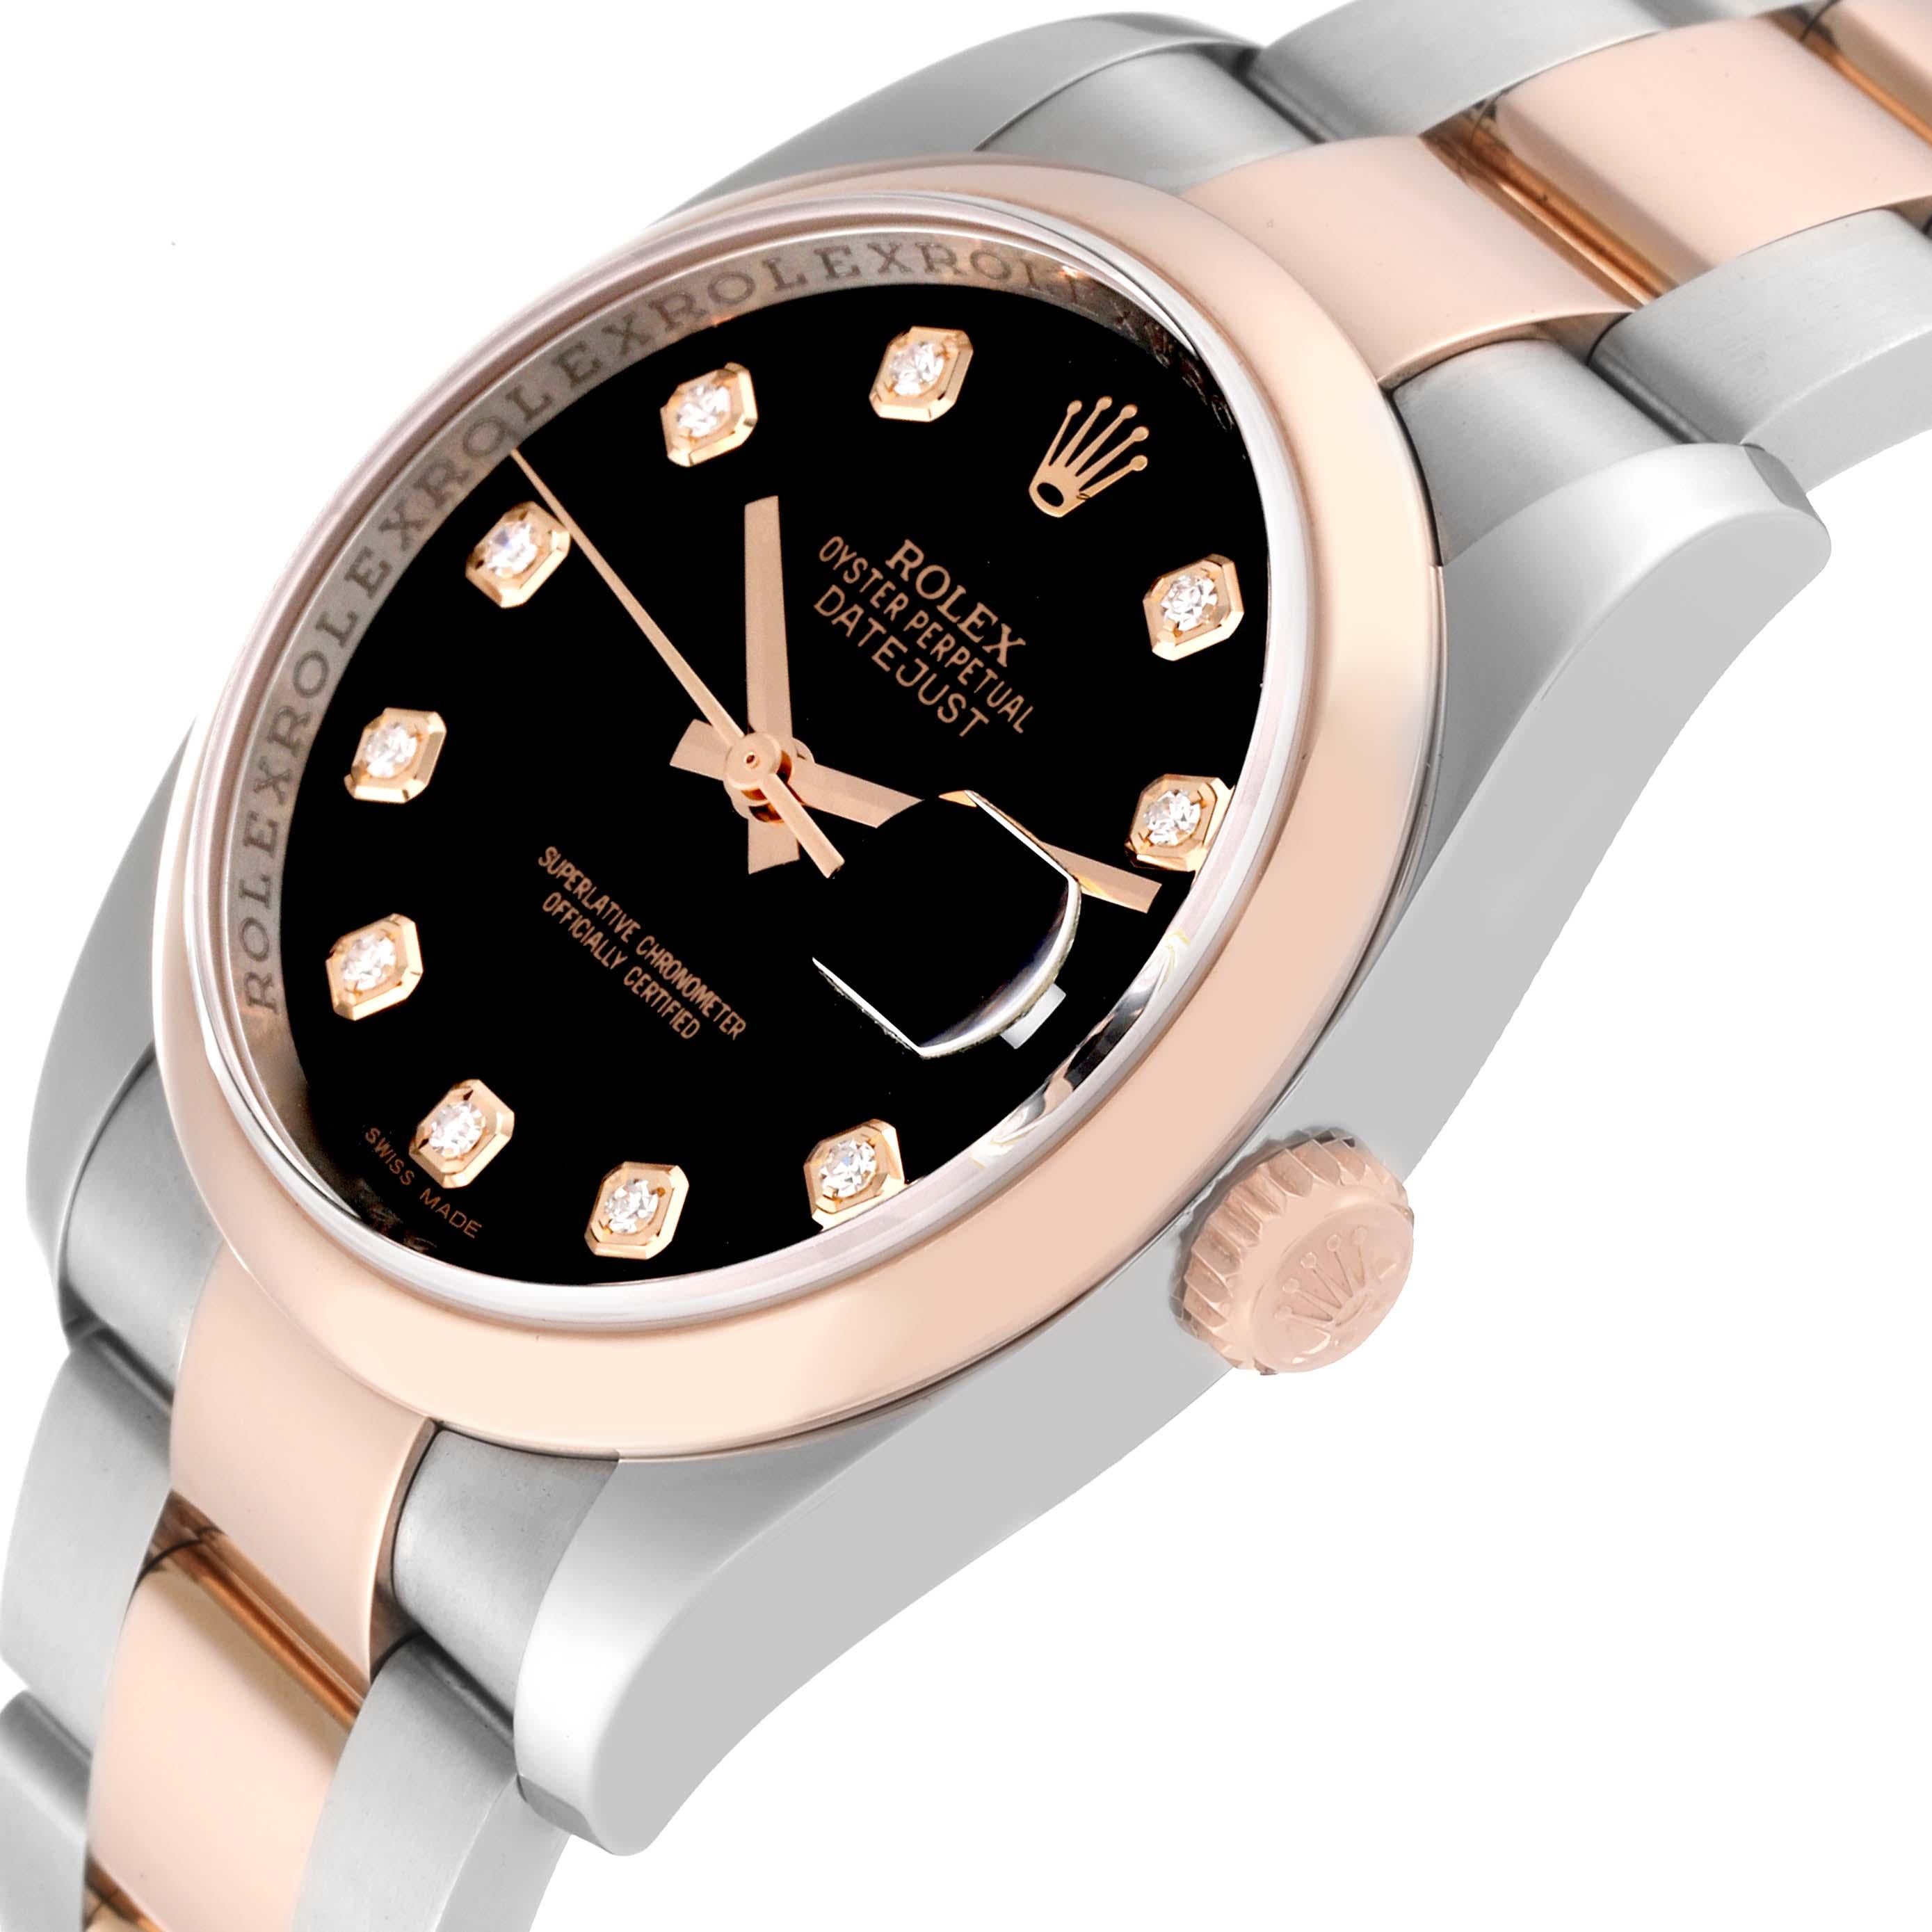 Rolex Datejust 36 Steel Rose Gold Black Diamond Dial Mens Watch 116201 In Excellent Condition For Sale In Atlanta, GA